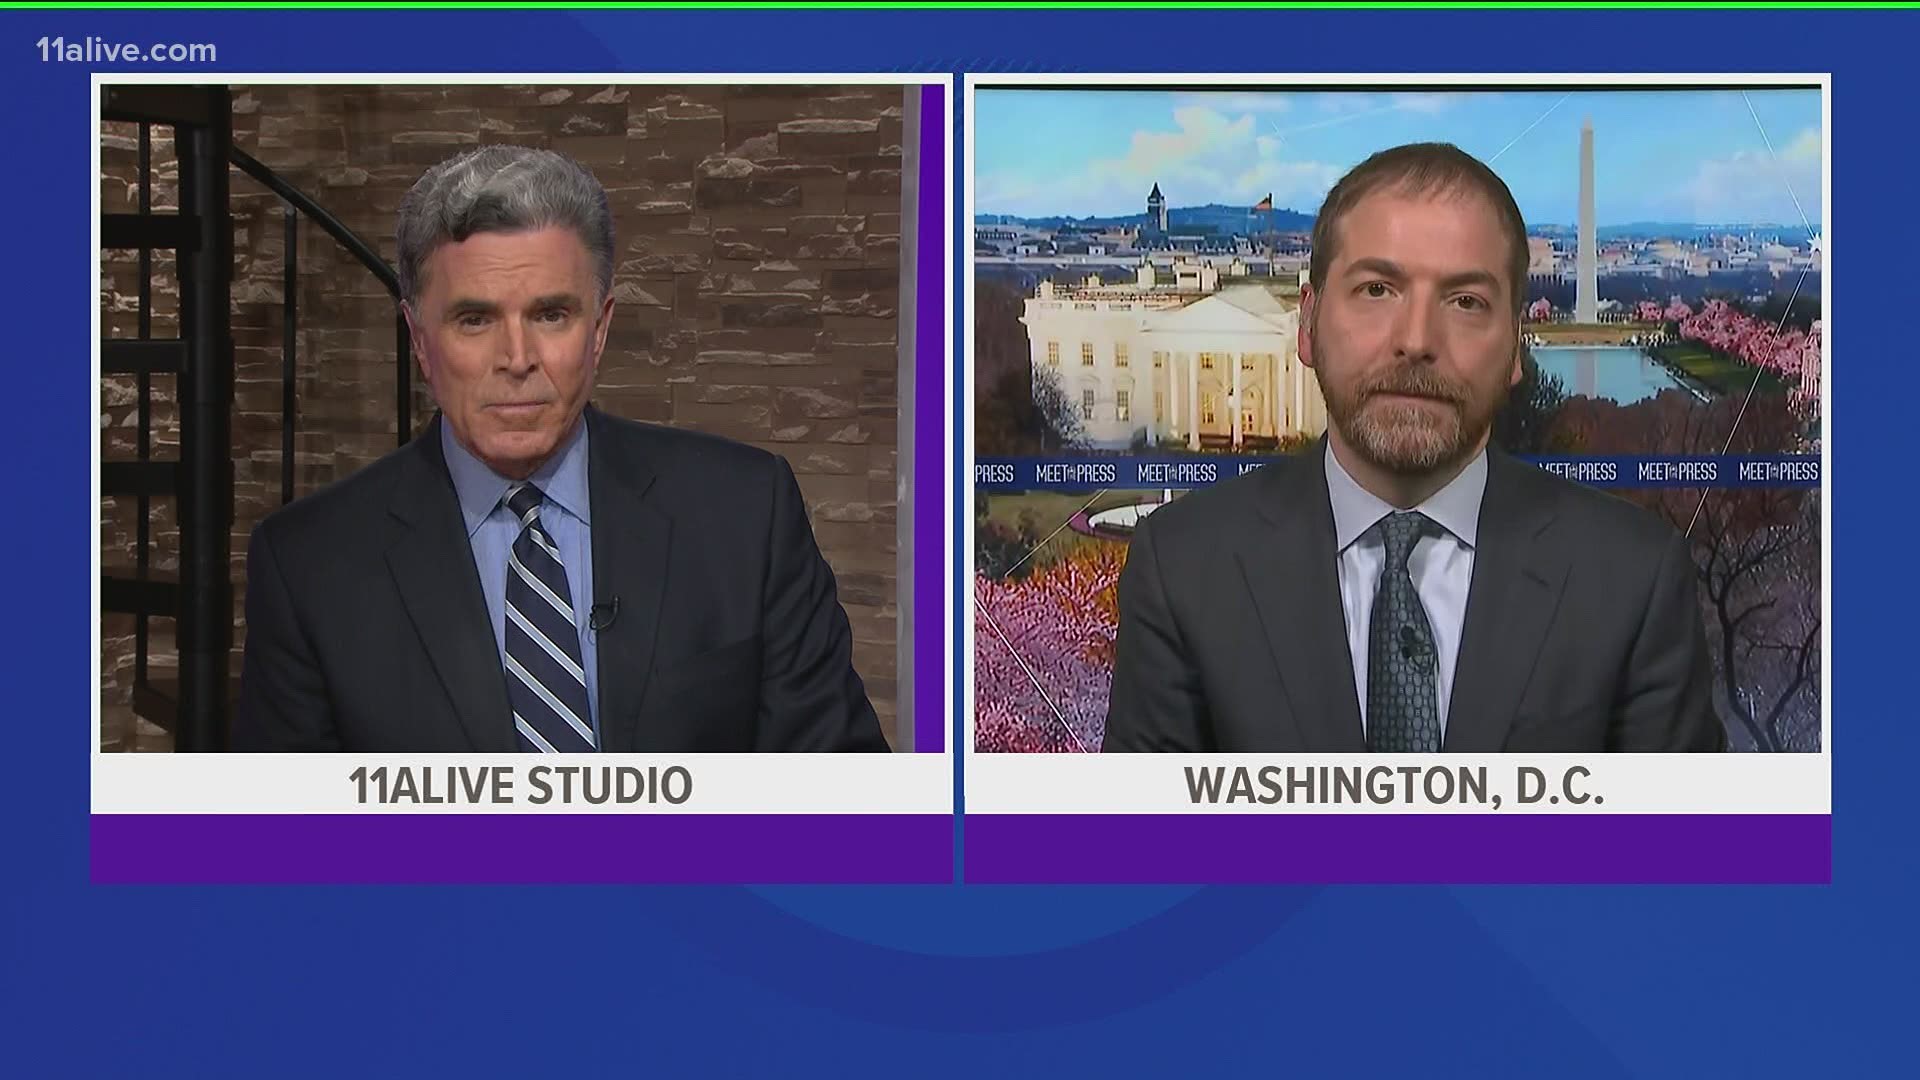 11Alive's Jeff Hullinger spoke with NBC's Chuck Todd about the situation.